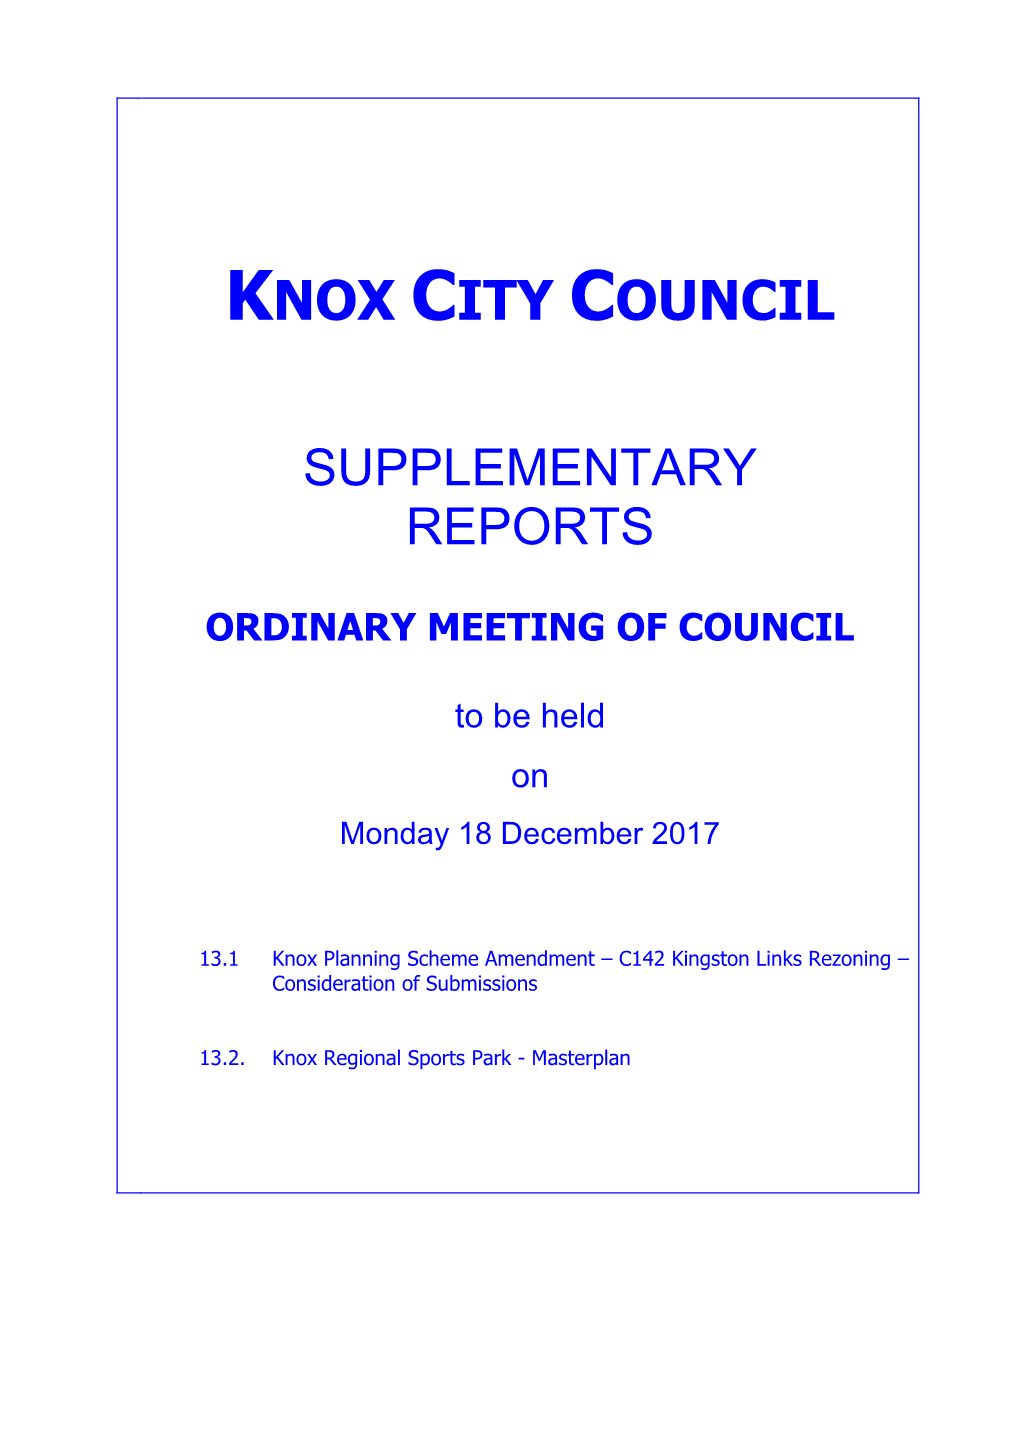 Supplementary Reports